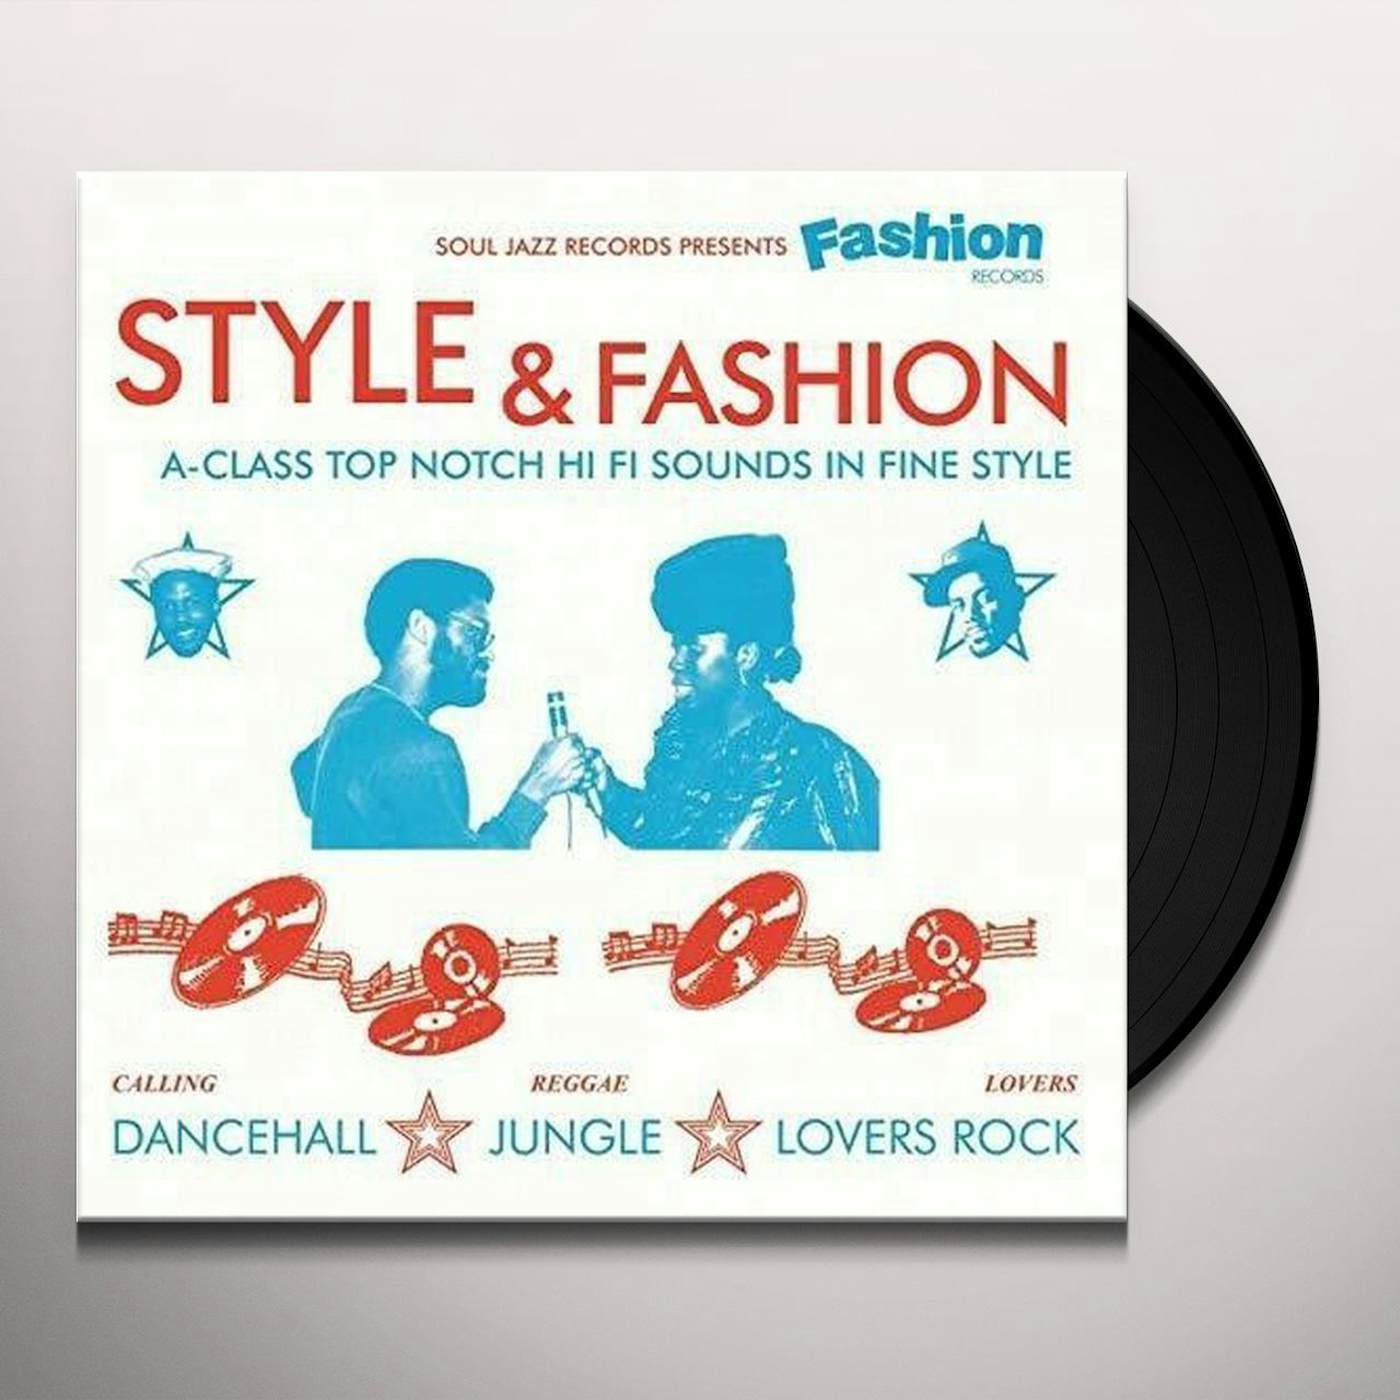 General Levy / Laurel & Hardy / Cutty Ranks Soul Jazz Records Presents Fashion Records: Style & Fashion Vinyl Record